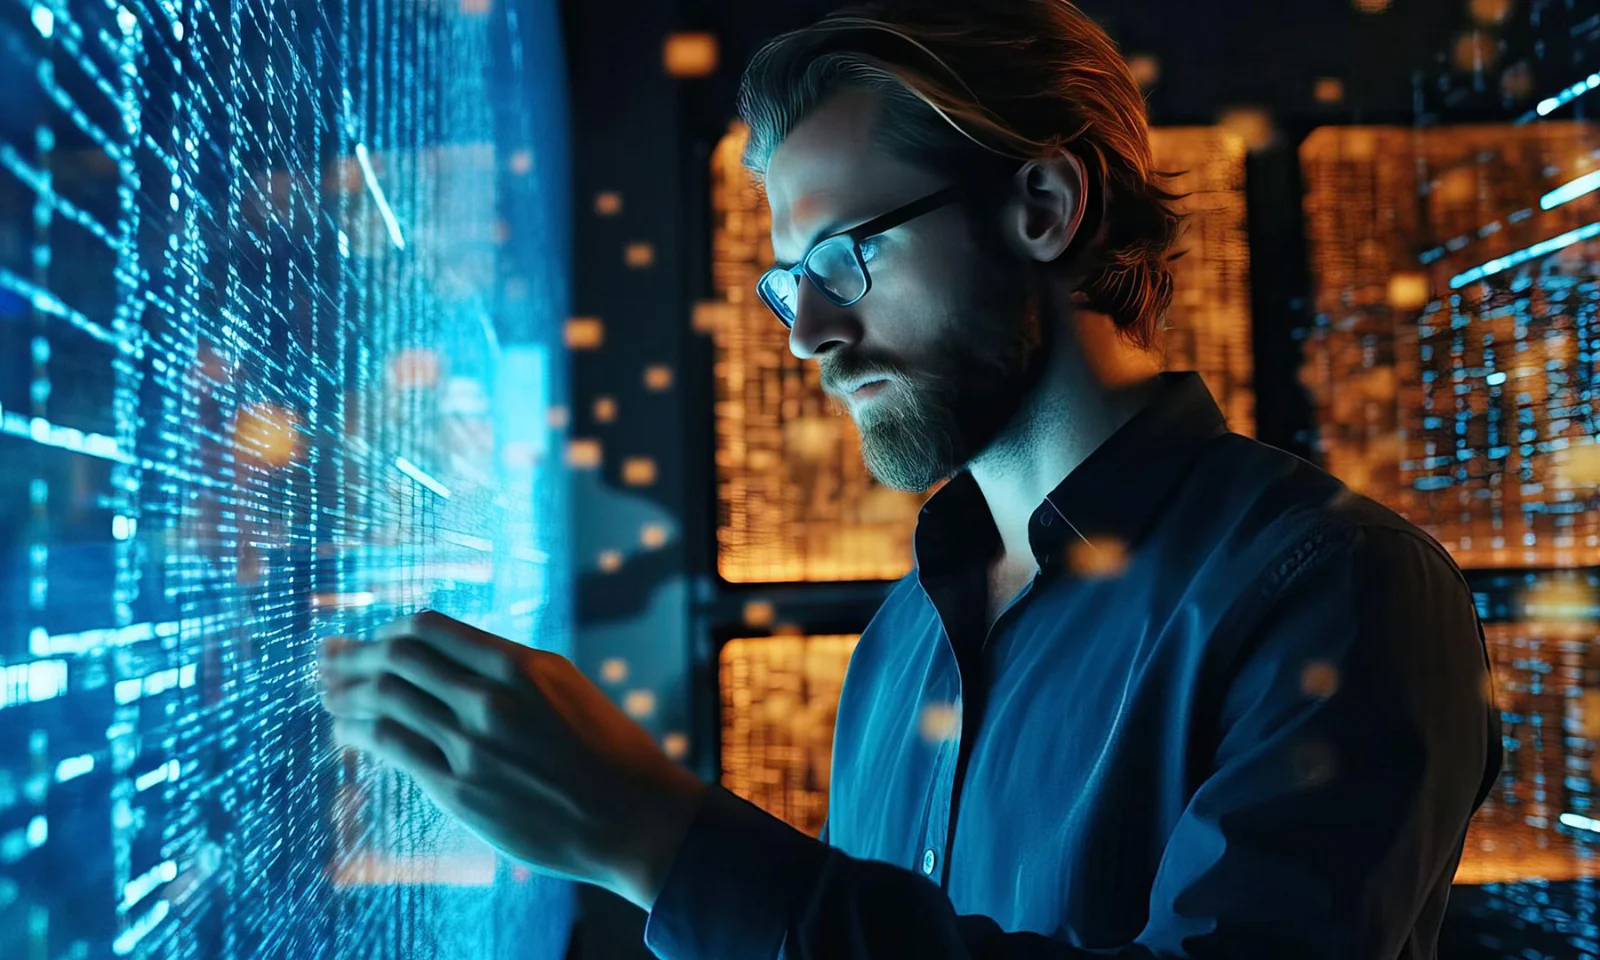 The image features a bearded man wearing glasses, engrossed in interacting with a large, glowing digital interface. The environment is rich with data streams and digital elements, suggesting a high-tech, futuristic setting. The background displays a mixture of blue and orange hues, representing the dynamic and analytical nature of asset management. This visual emphasizes the integration of advanced technology and data analytics in modern asset management, showcasing a professional deeply engaged in optimizing financial assets through innovative digital tools.